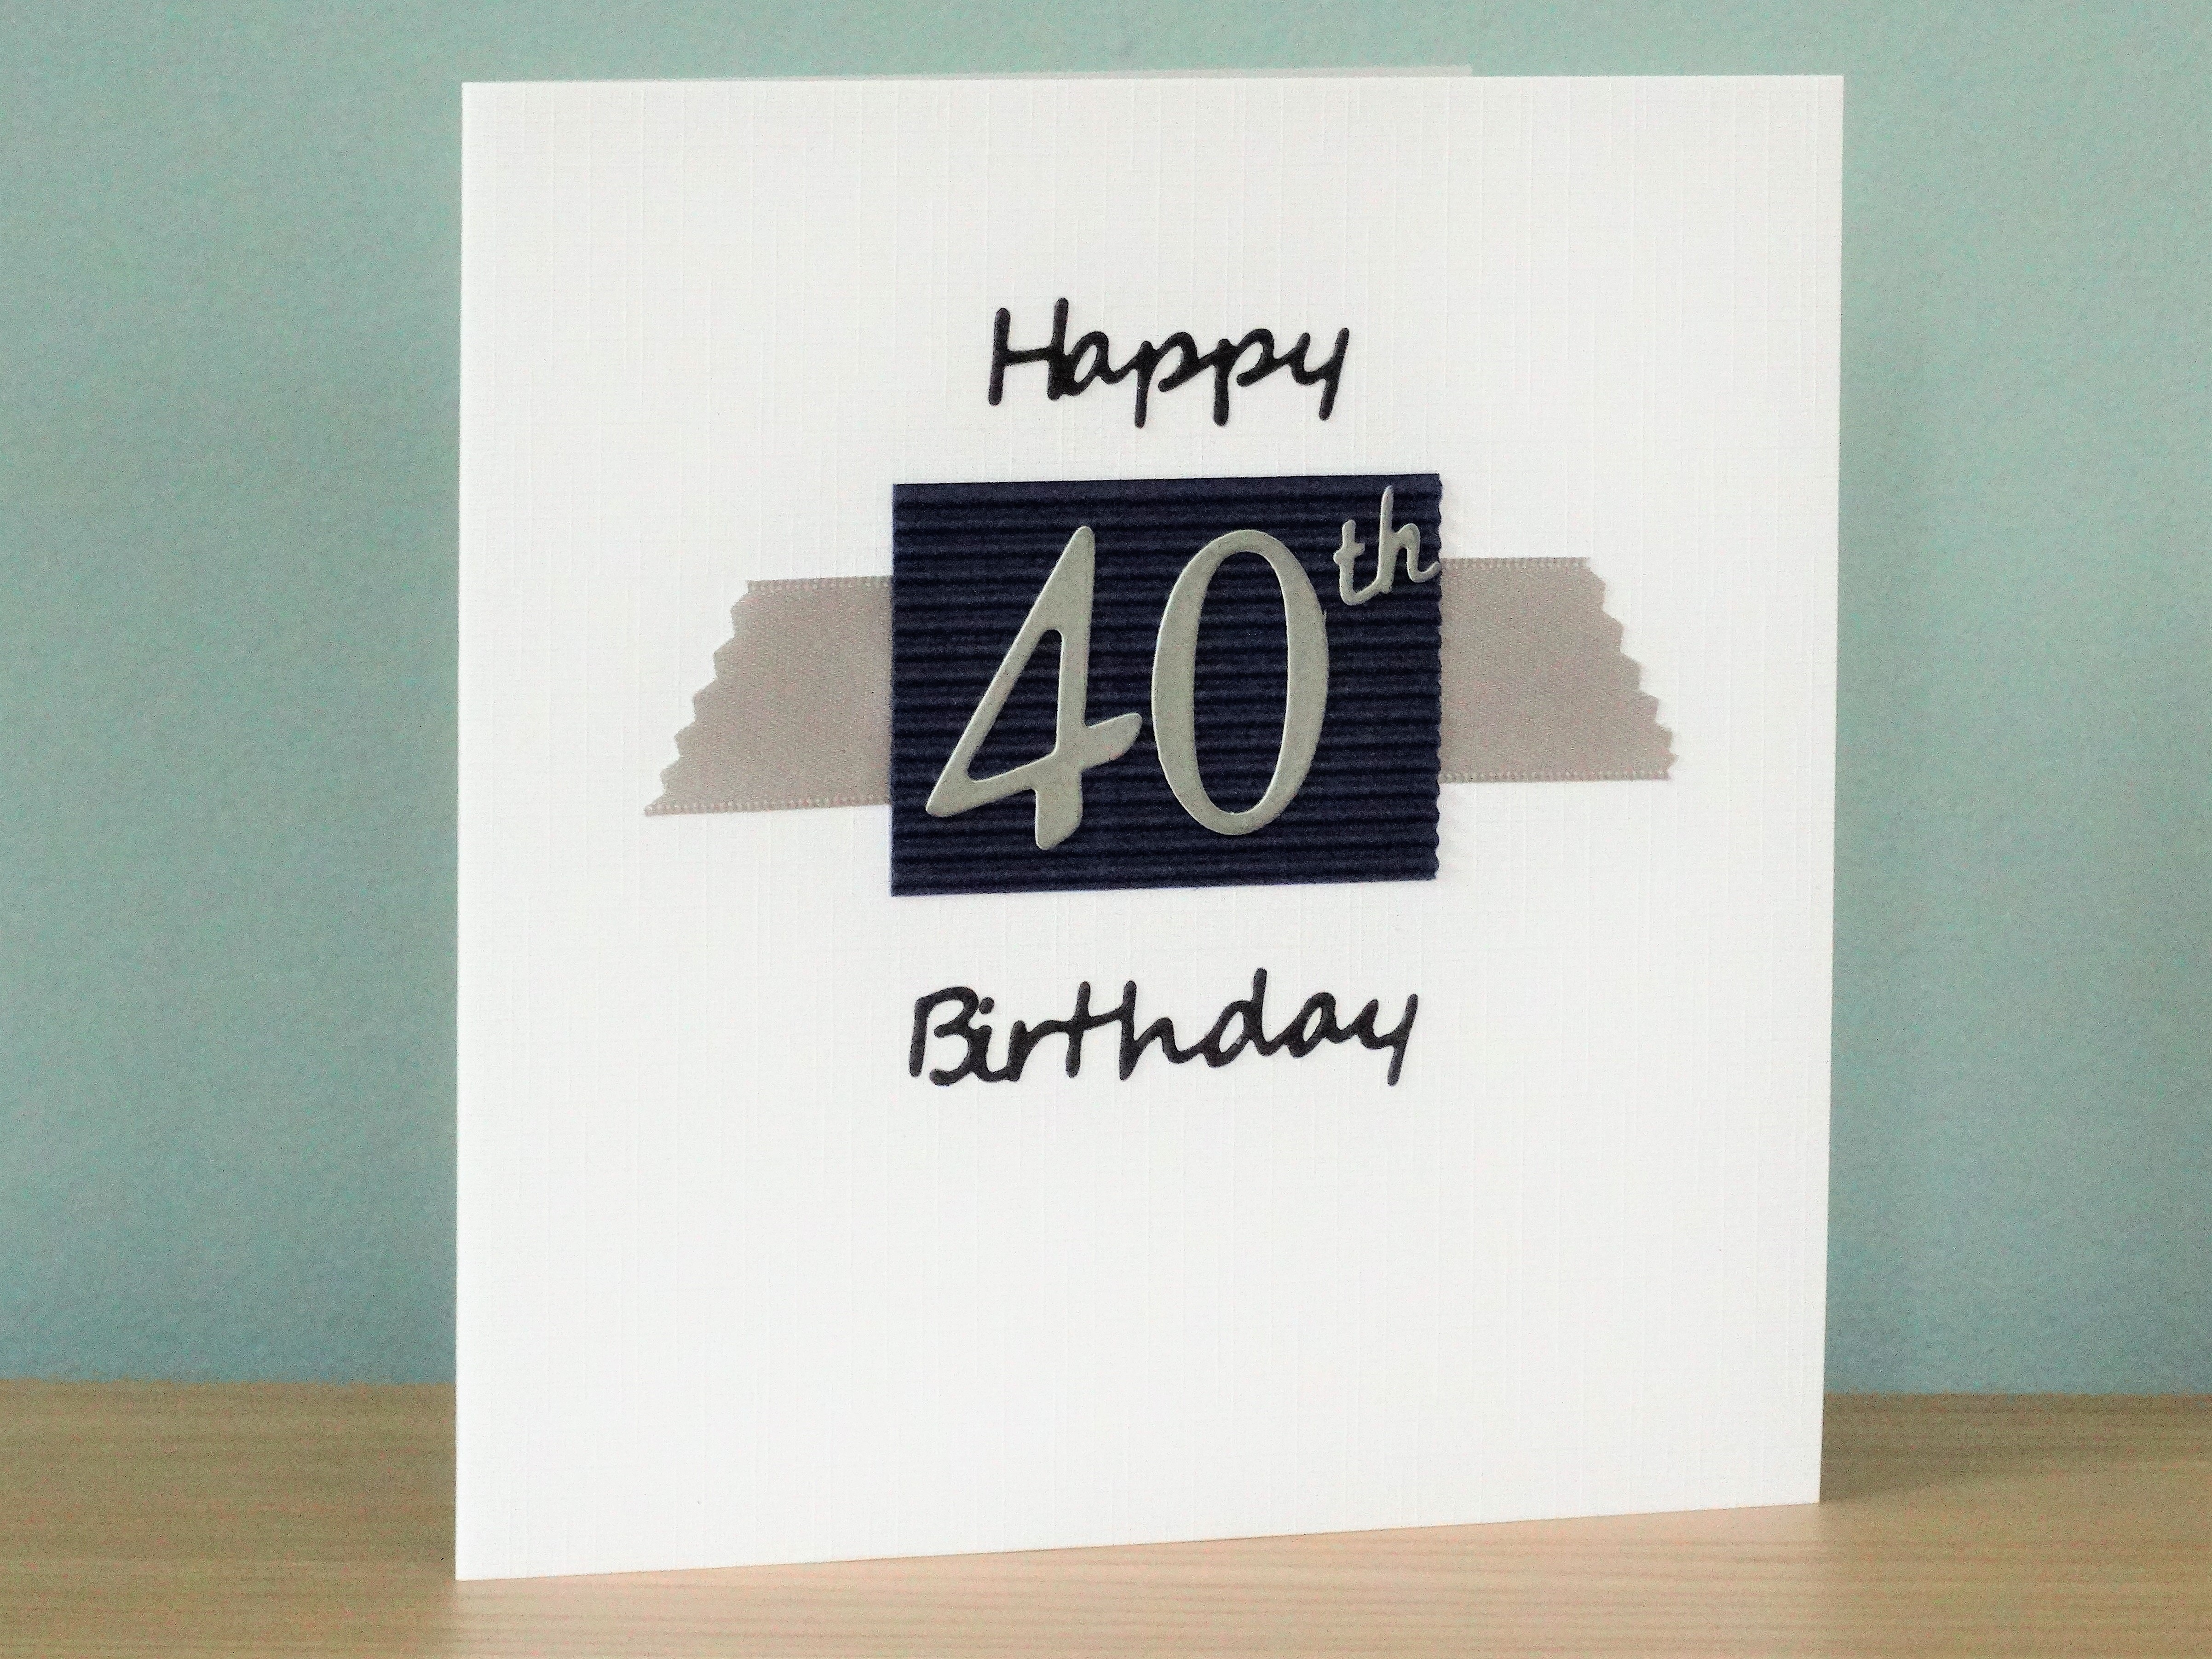 40 Birthday Card Ideas Handmade Greeting Cards A 40th Birthday Card In Pink Or Blue For A Young 40 Year Old